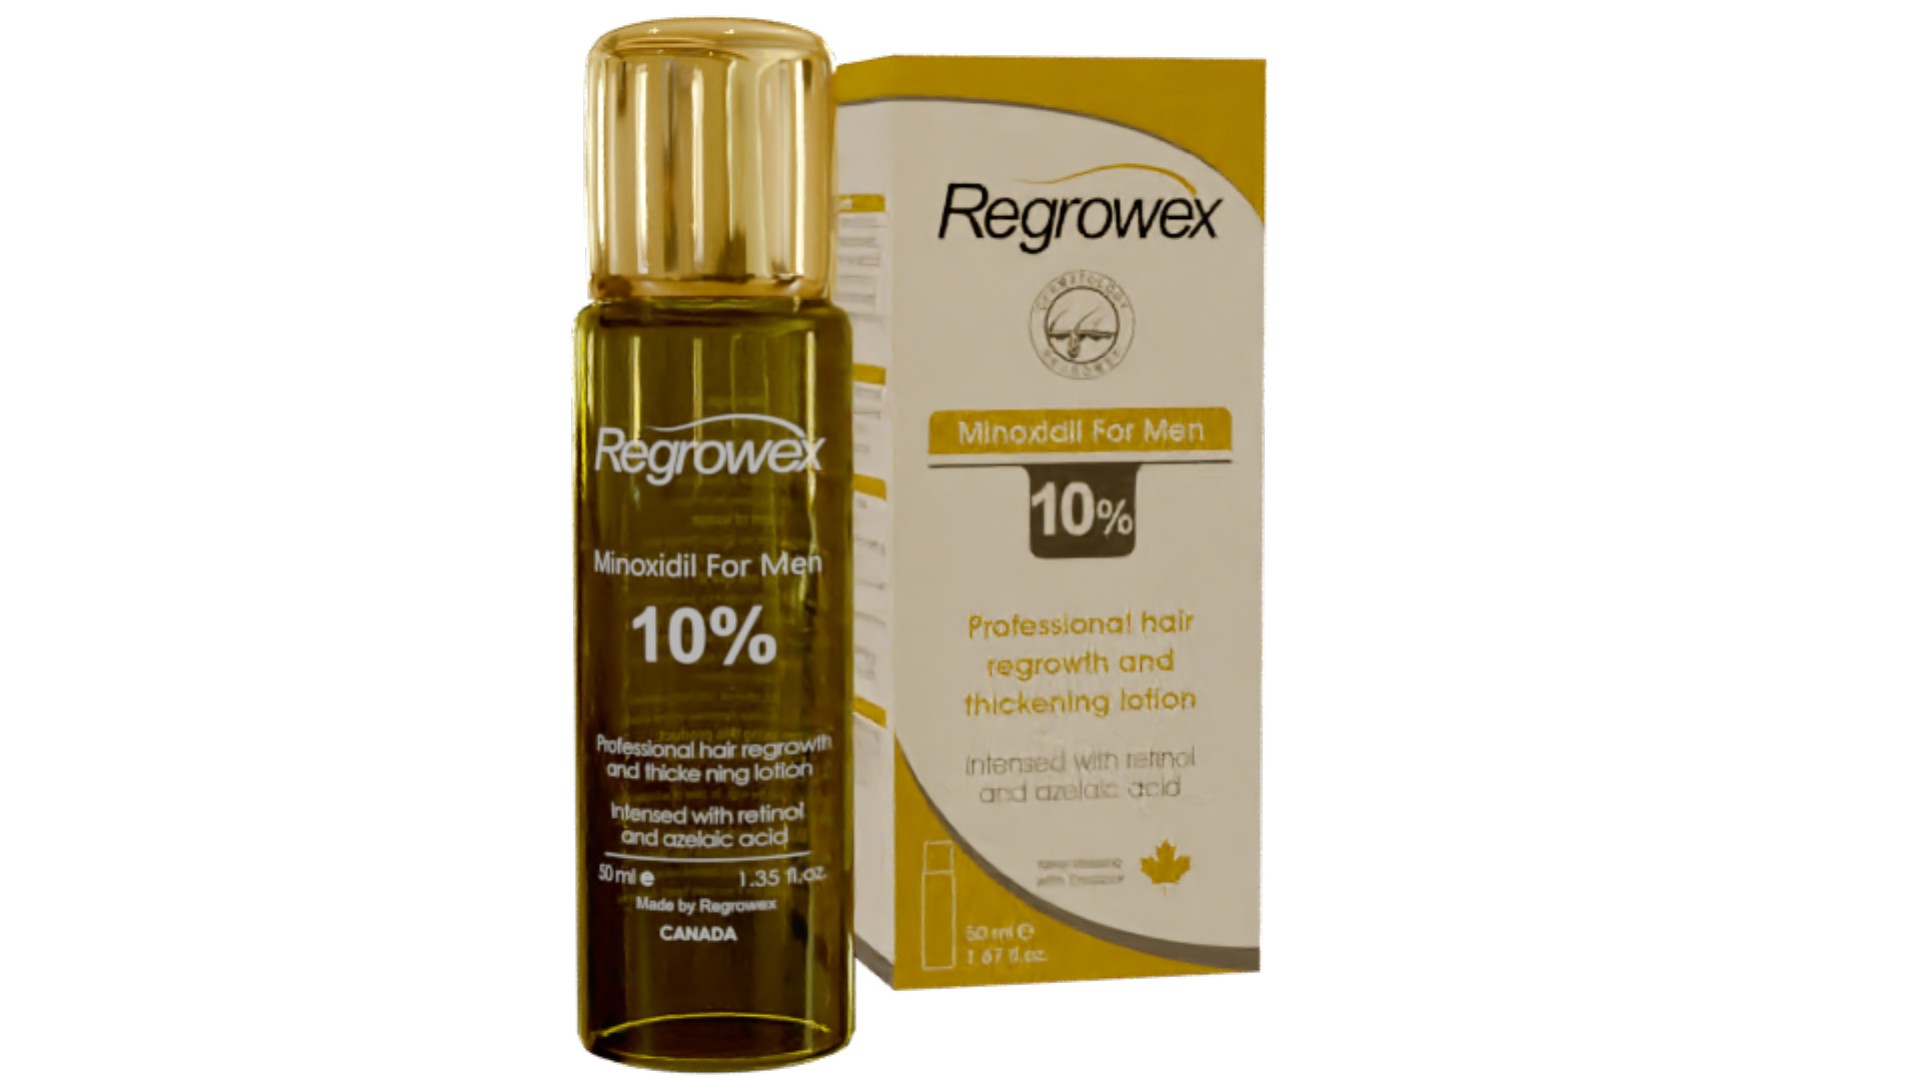 regrowex minoxidil solution 10% bottle with box